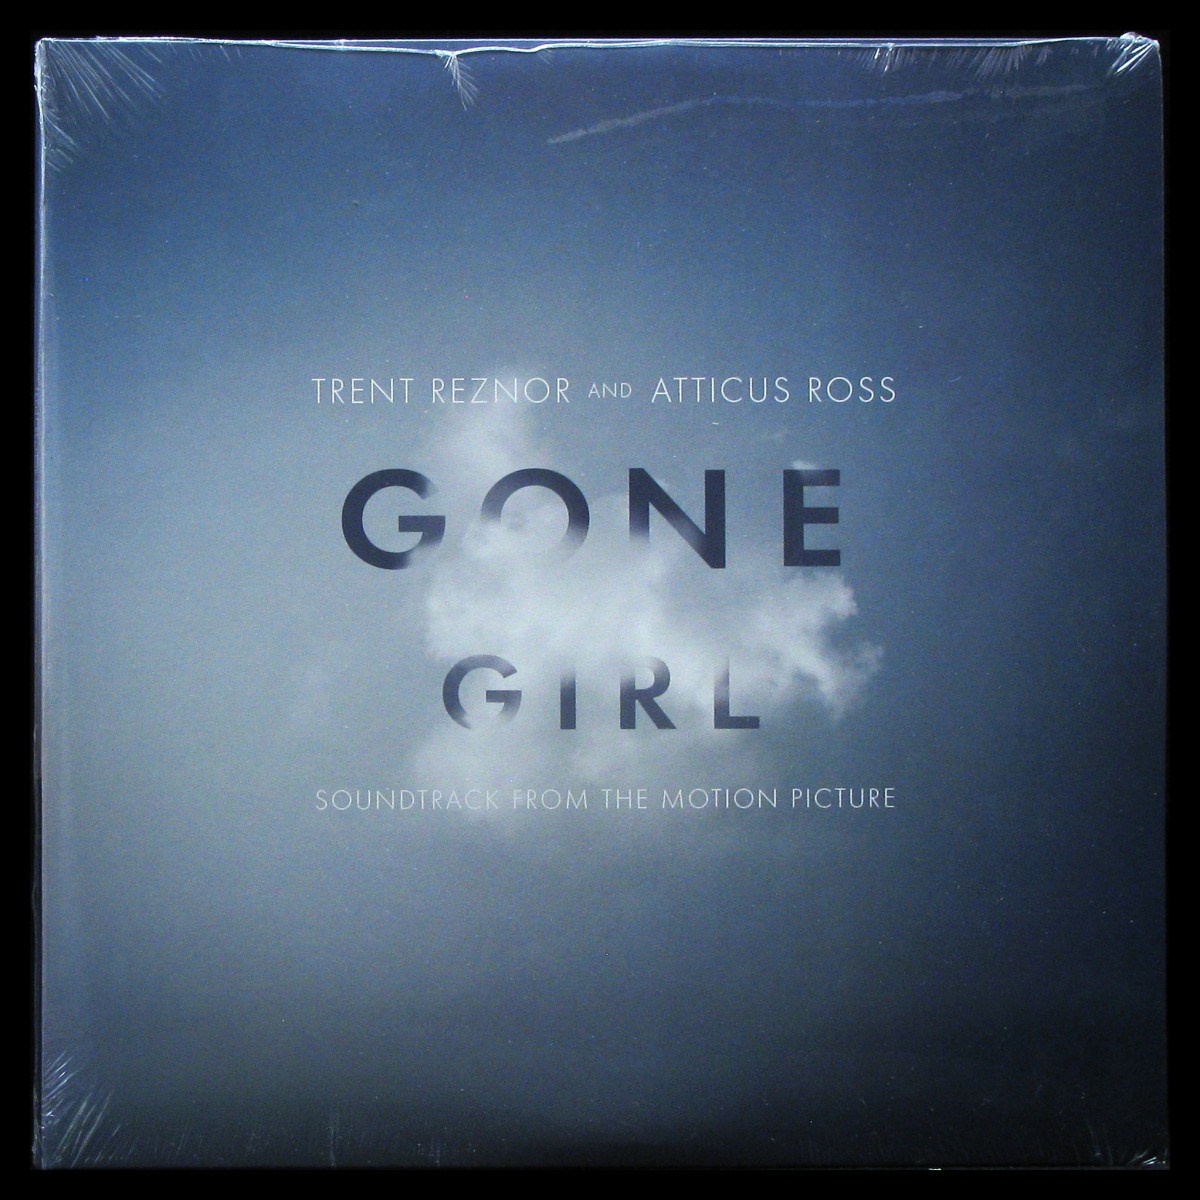 LP Trent Reznor And Atticus Ross — Gone Girl (Soundtrack From The Motion Picture) (2LP) фото